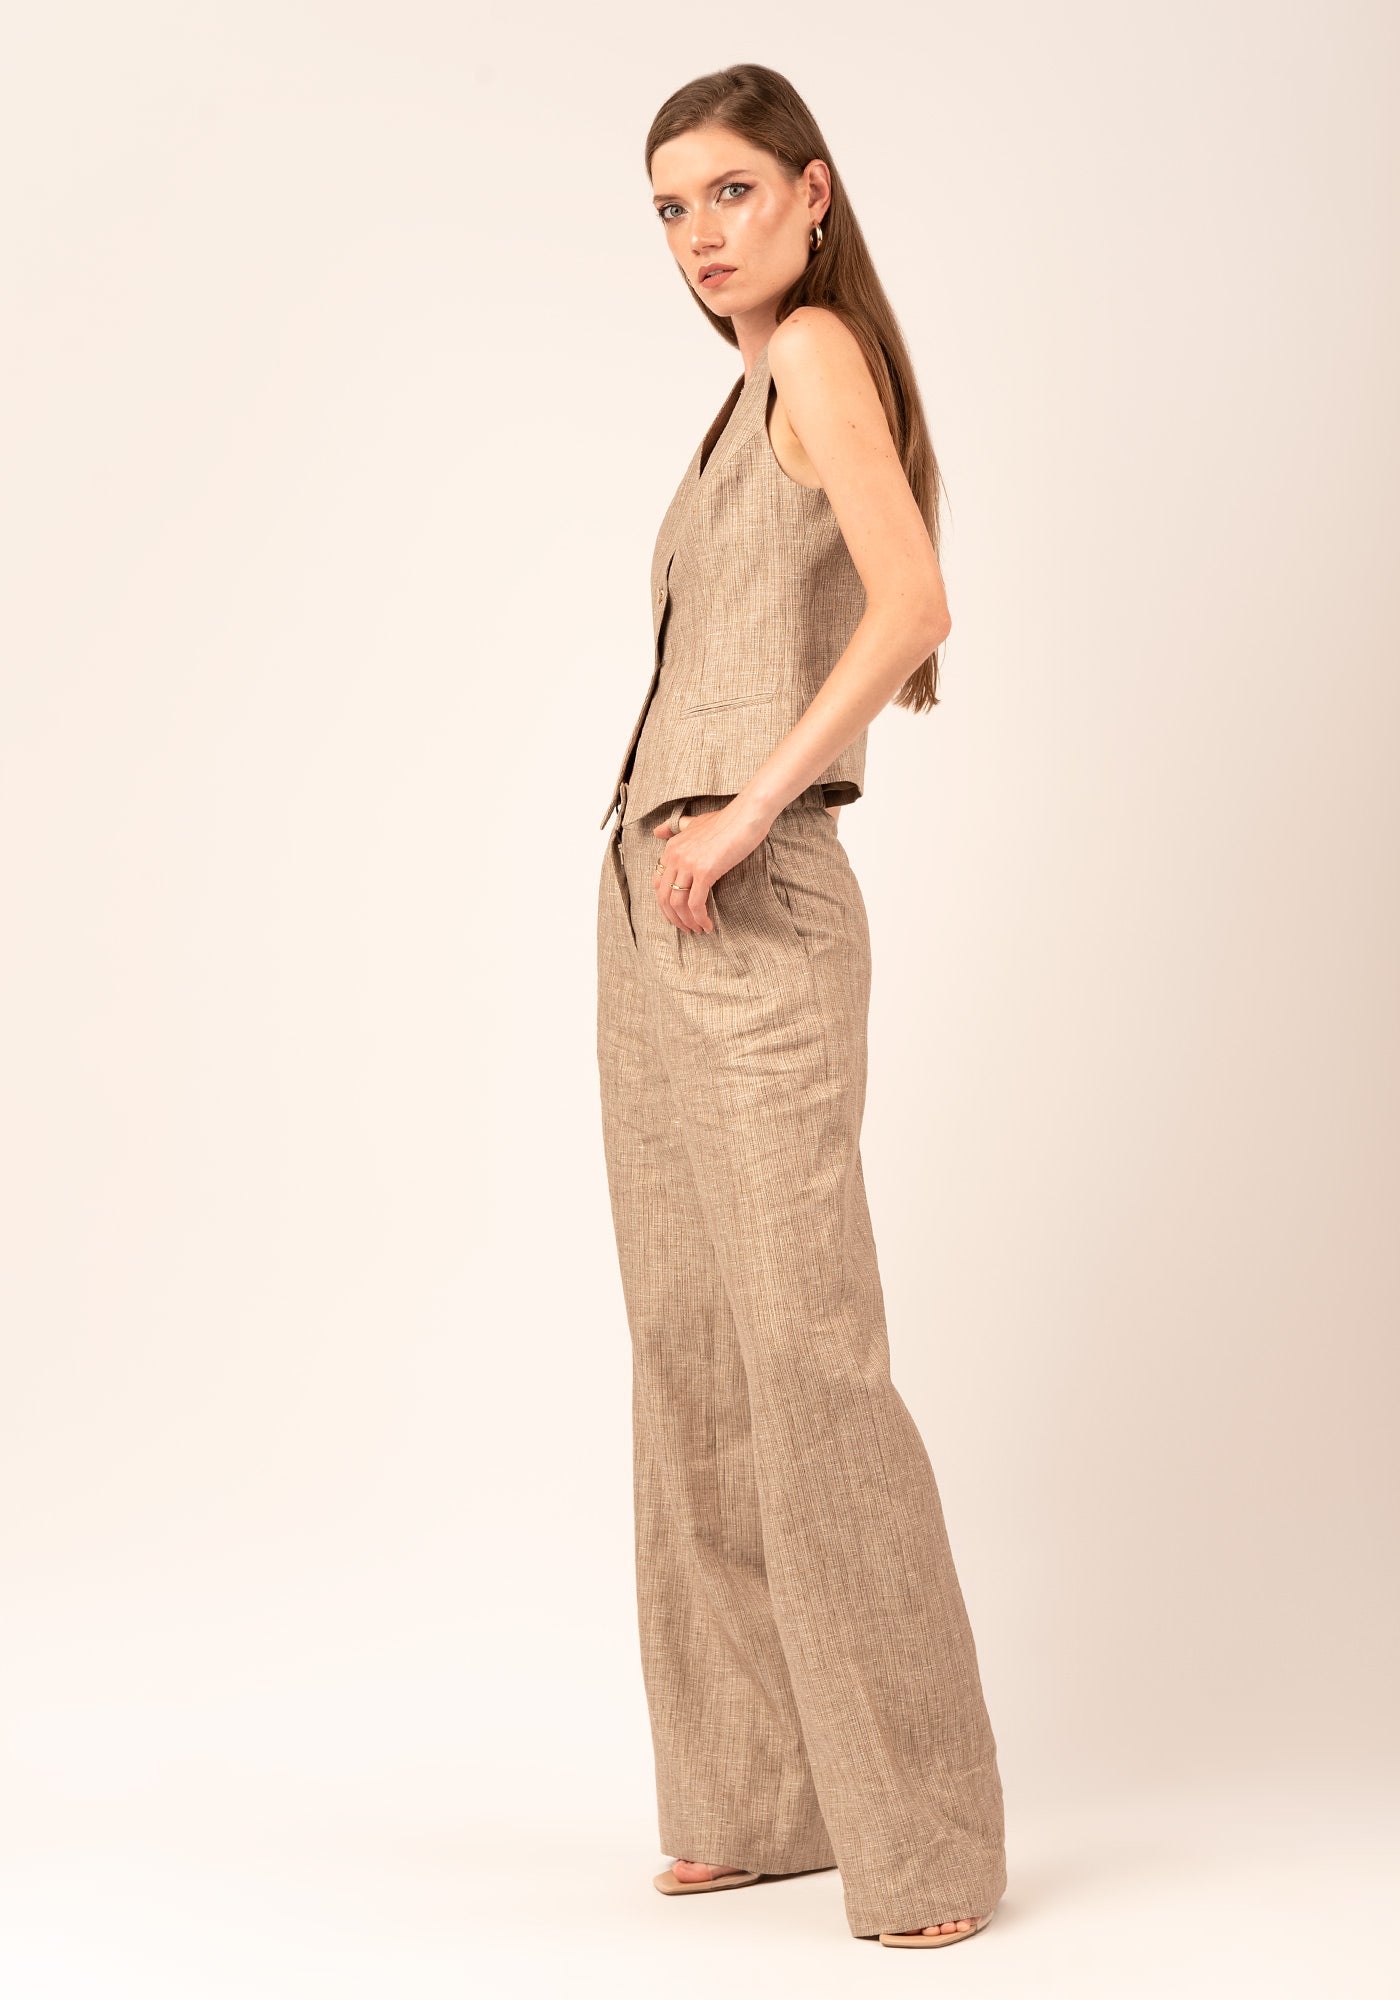 High waisted Straight Leg Women's Linen Pant in Beige with Gold Lamé